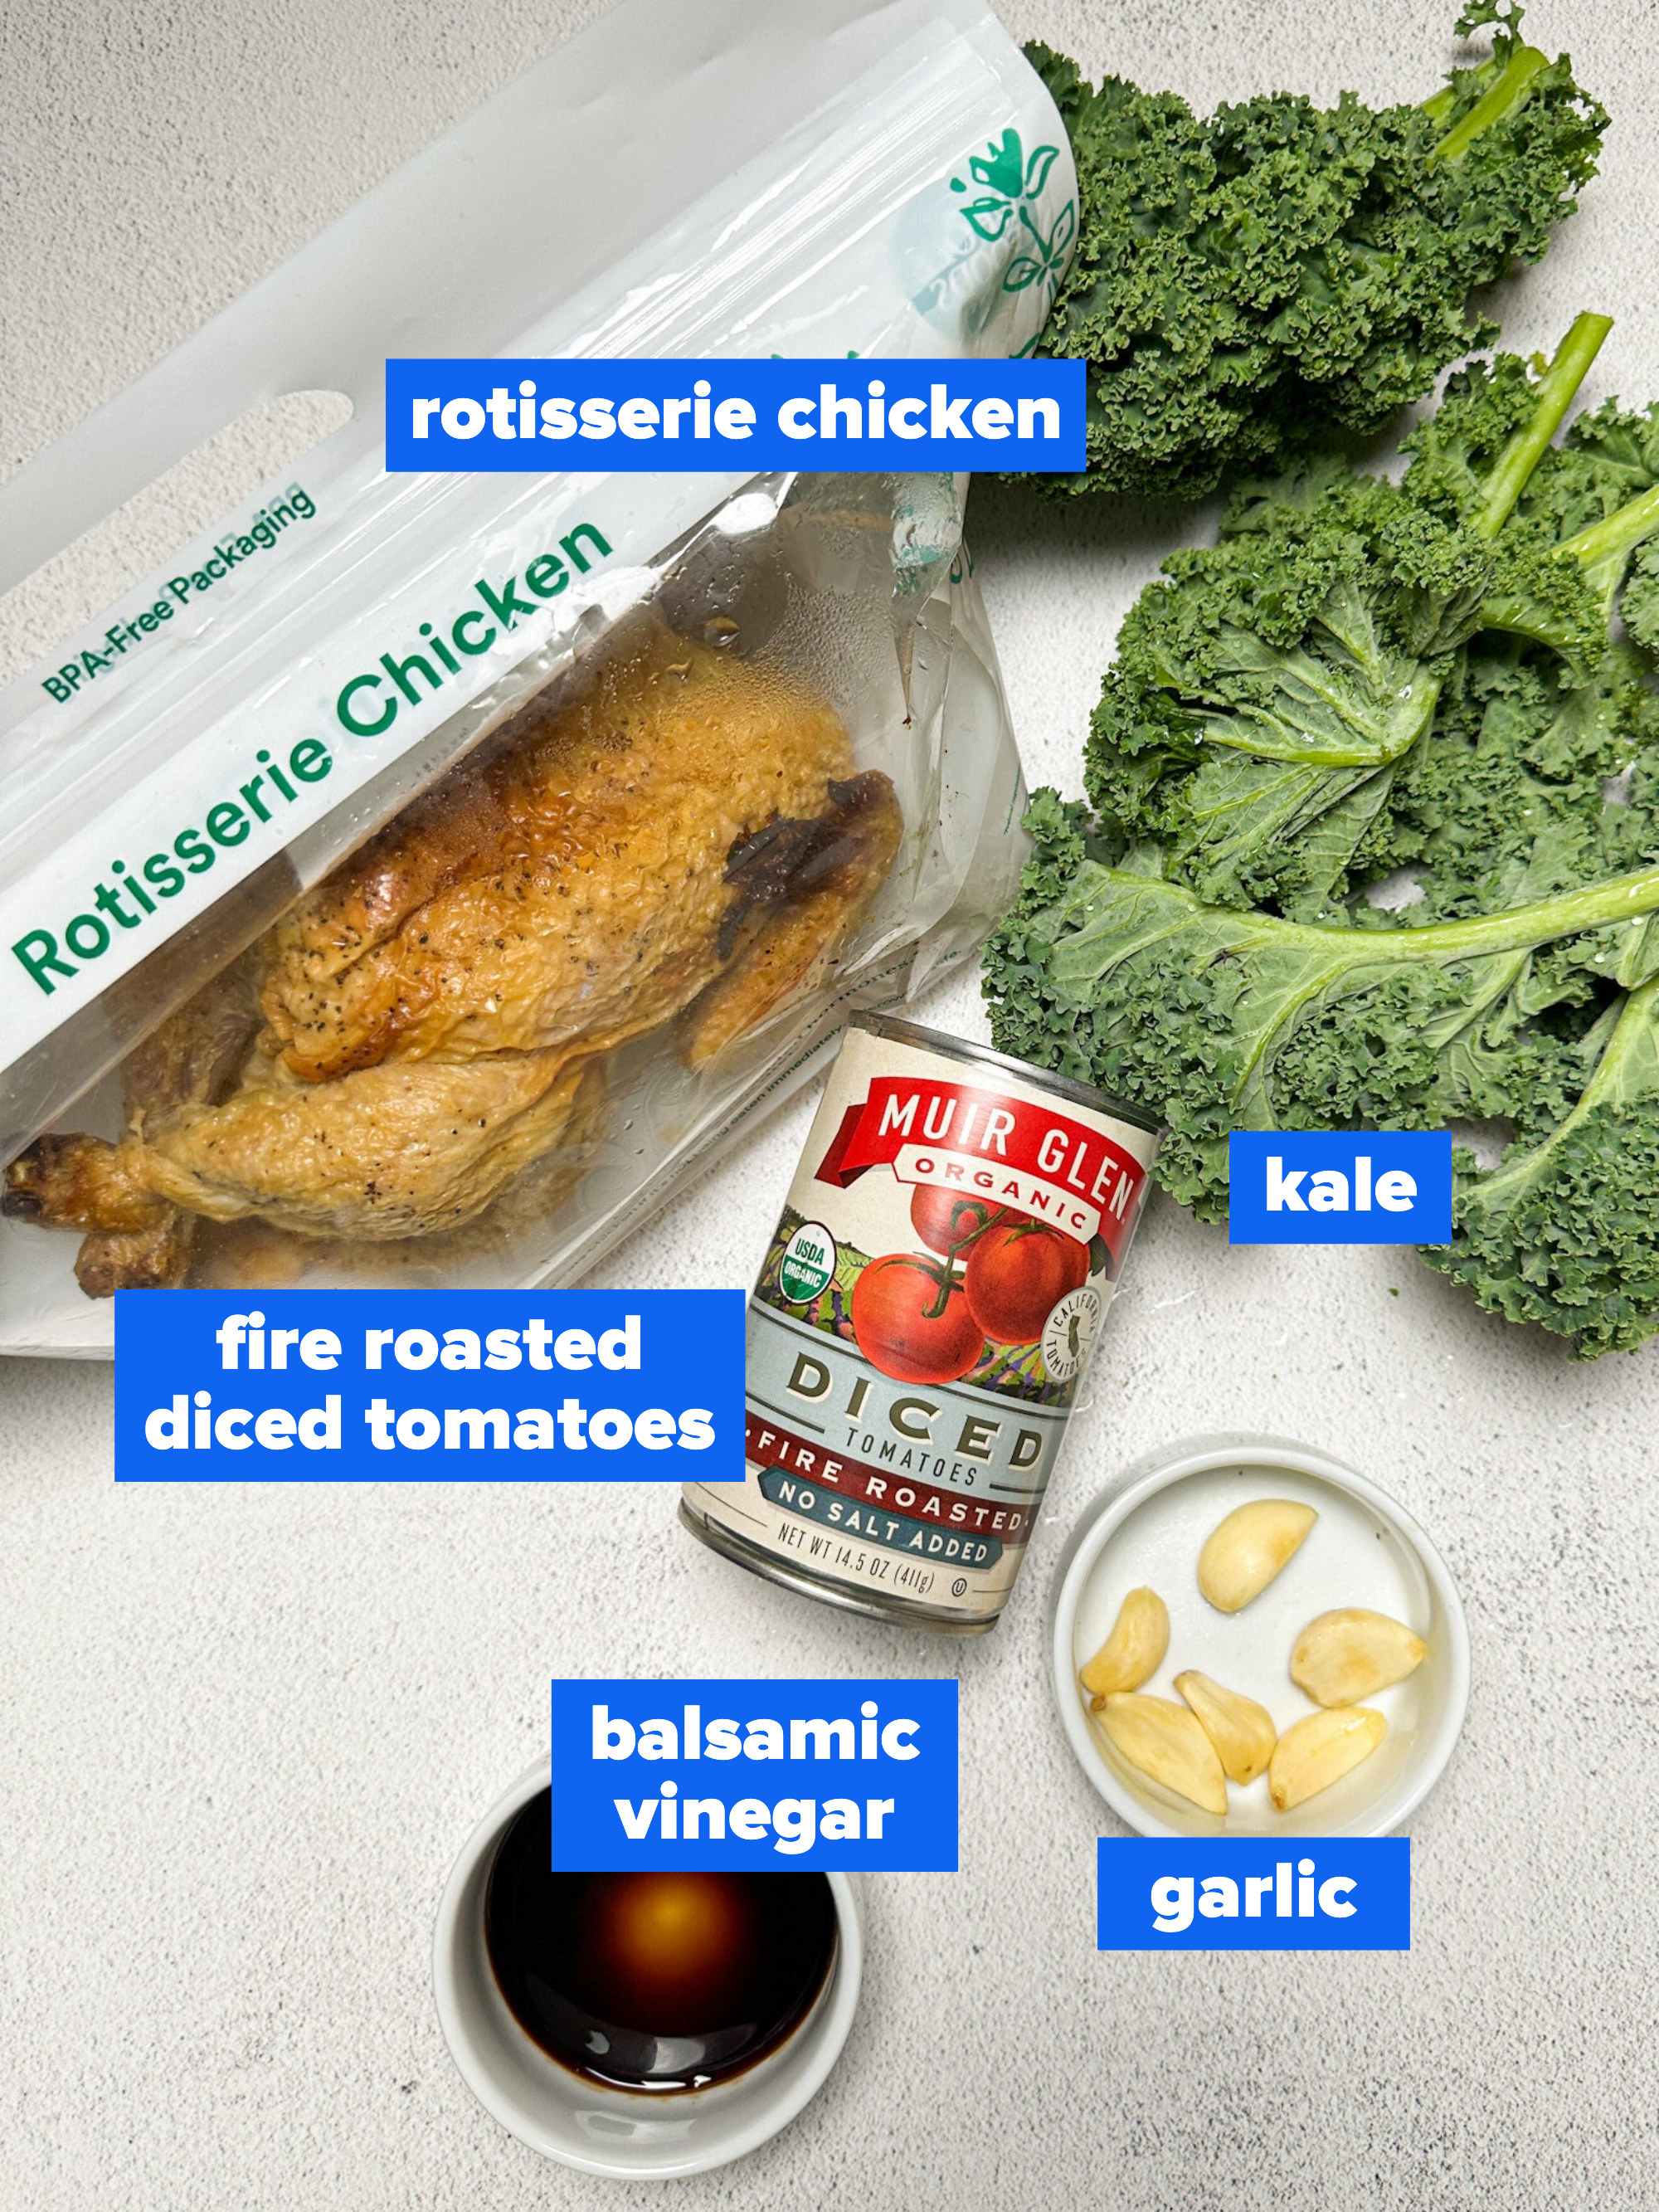 the ingredients: rotisserie chicken, kale, fire roasted diced tomatoes, balsamic vinegar, garlic